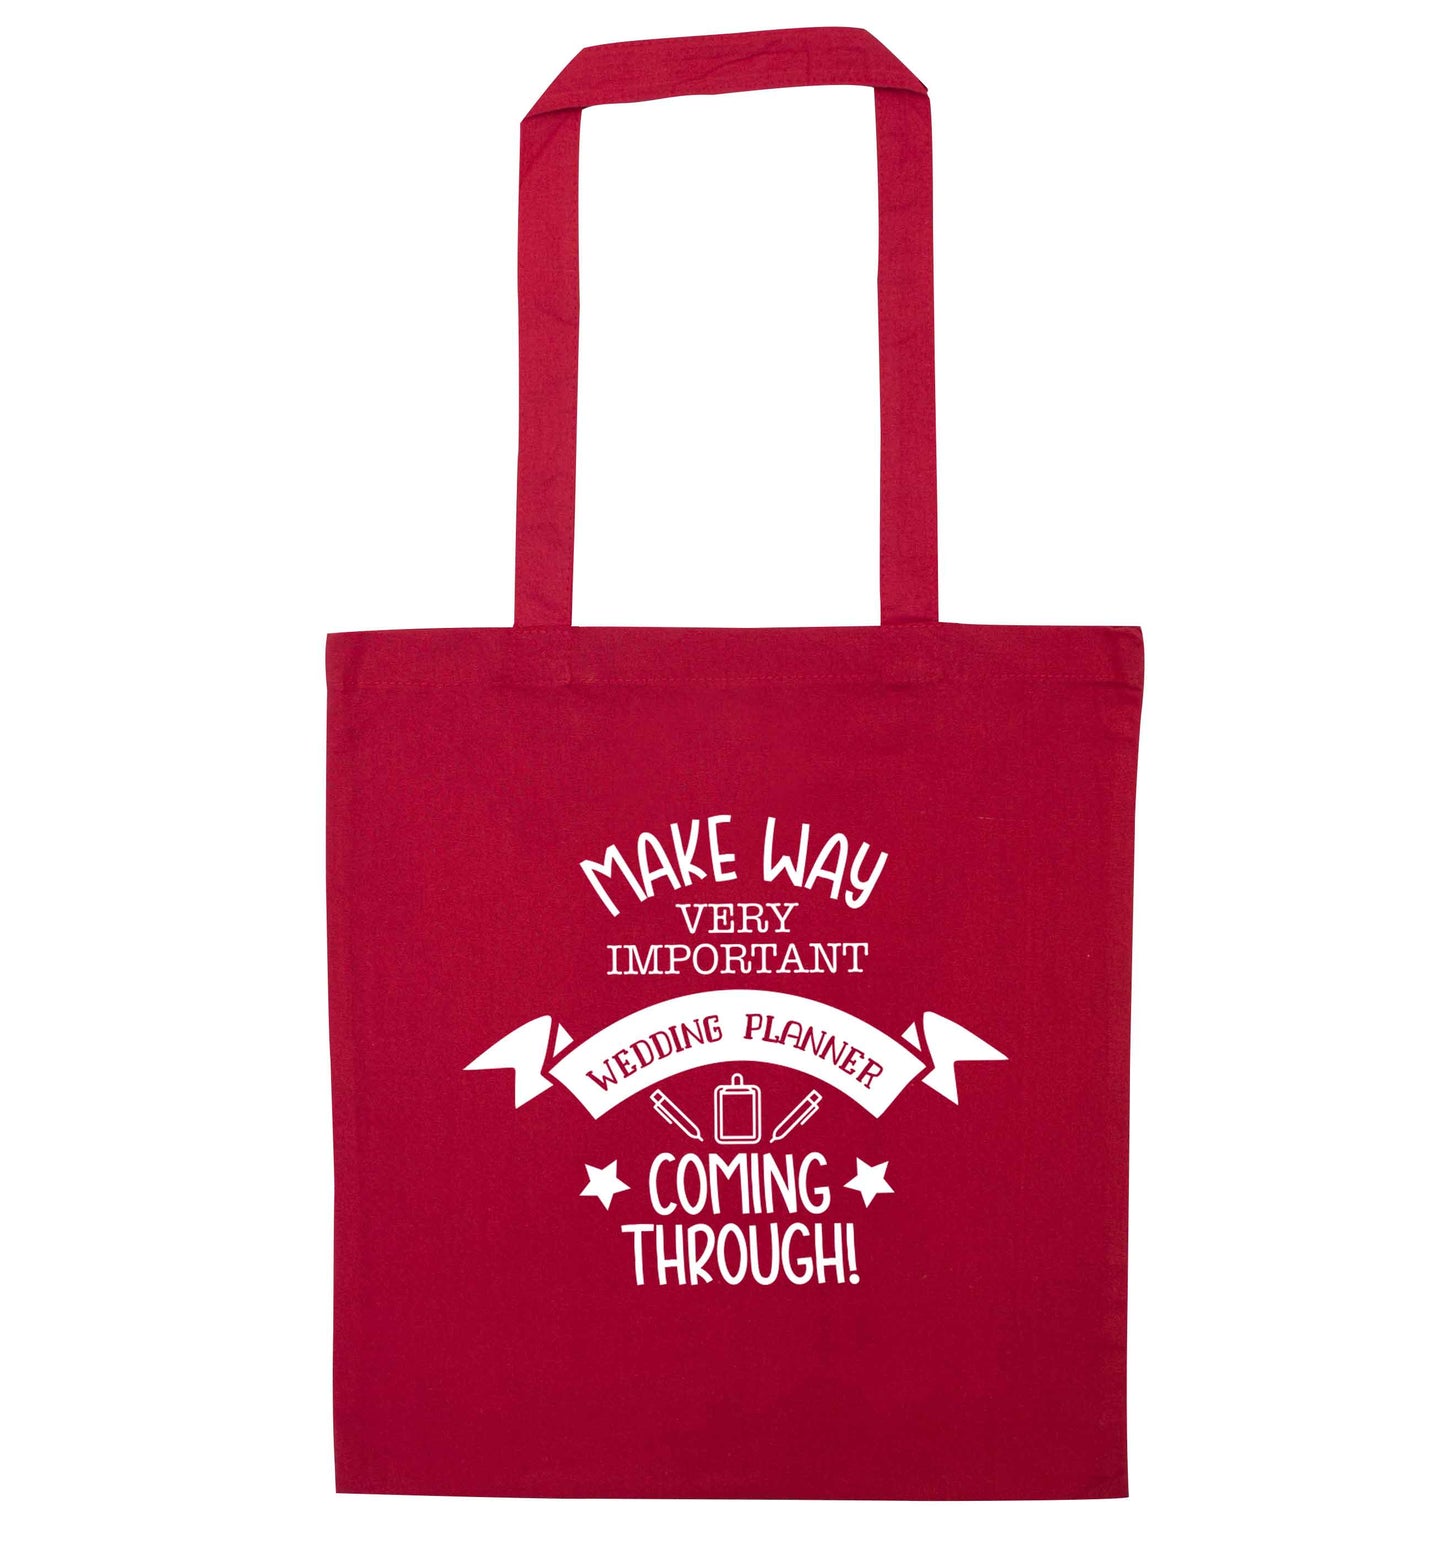 Make way very important wedding planner coming through red tote bag